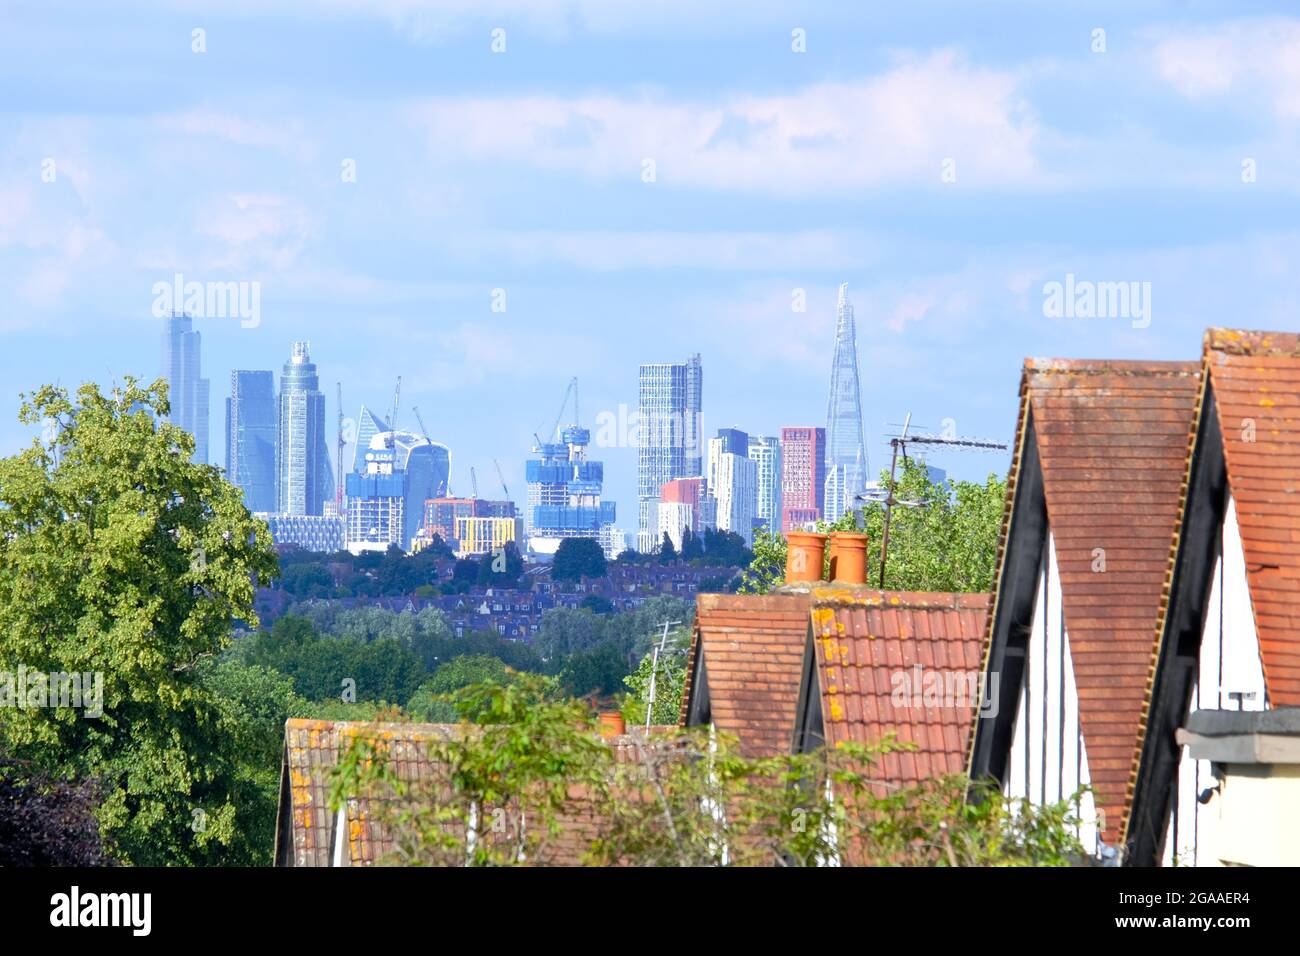 View over Wimbledon Village rooftops where the London skyline from Wandsworth, Vauxhall and the City of London can be seen in the distance. Stock Photo